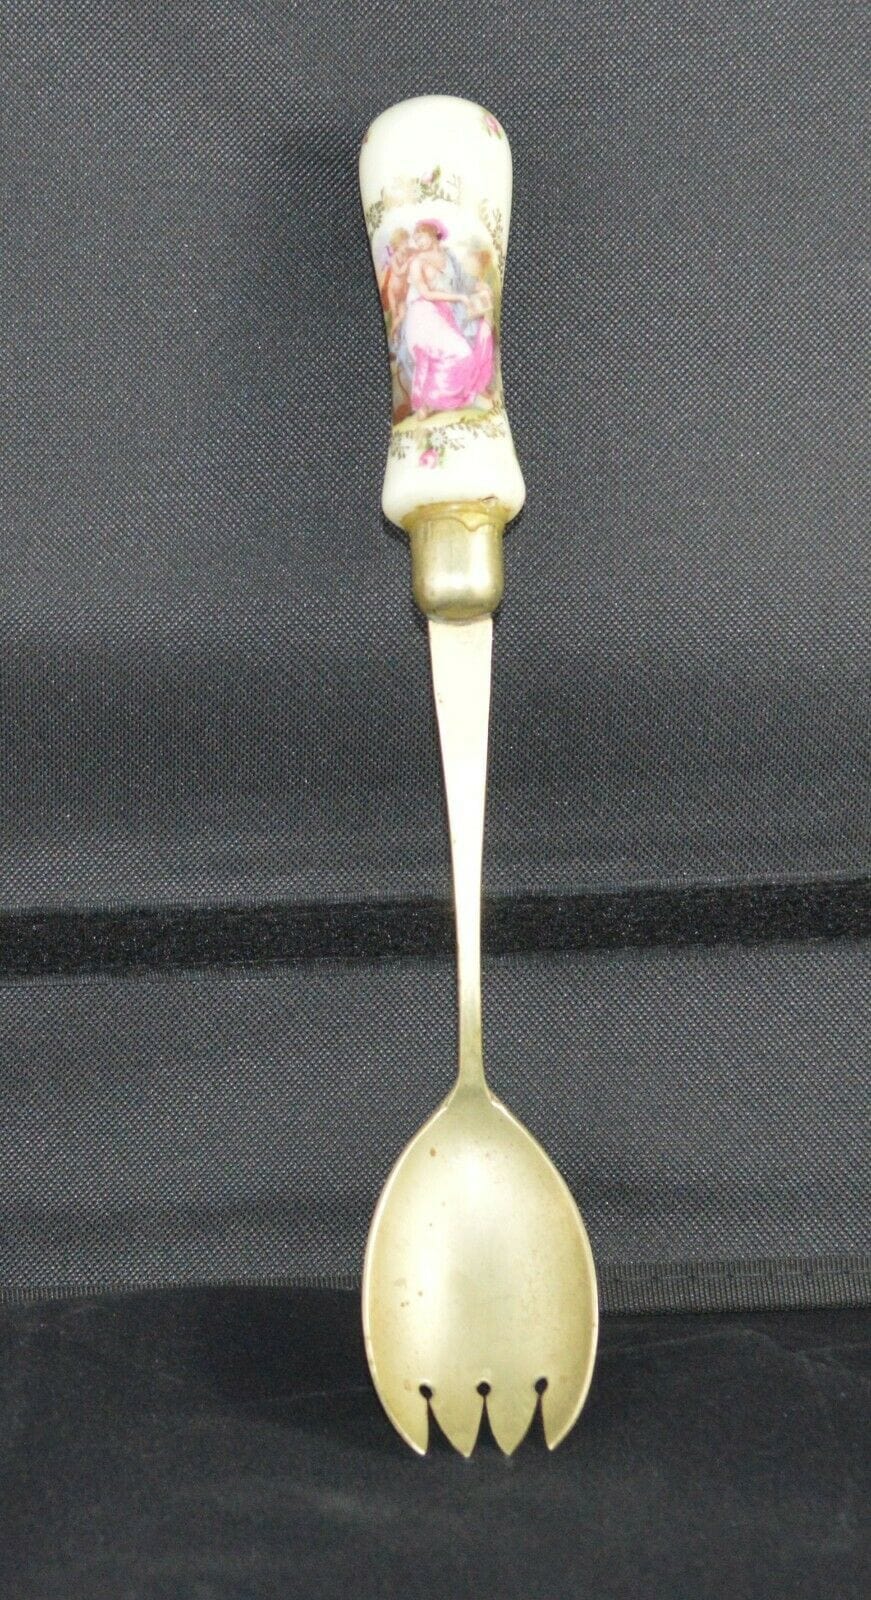 TABLEWARE E.P.N.S. SERVING FORK WITH PICTURE HANDLE ( PREVIOUSLY OWNED)FAIRLY GOOD CONDITION - TMD167207